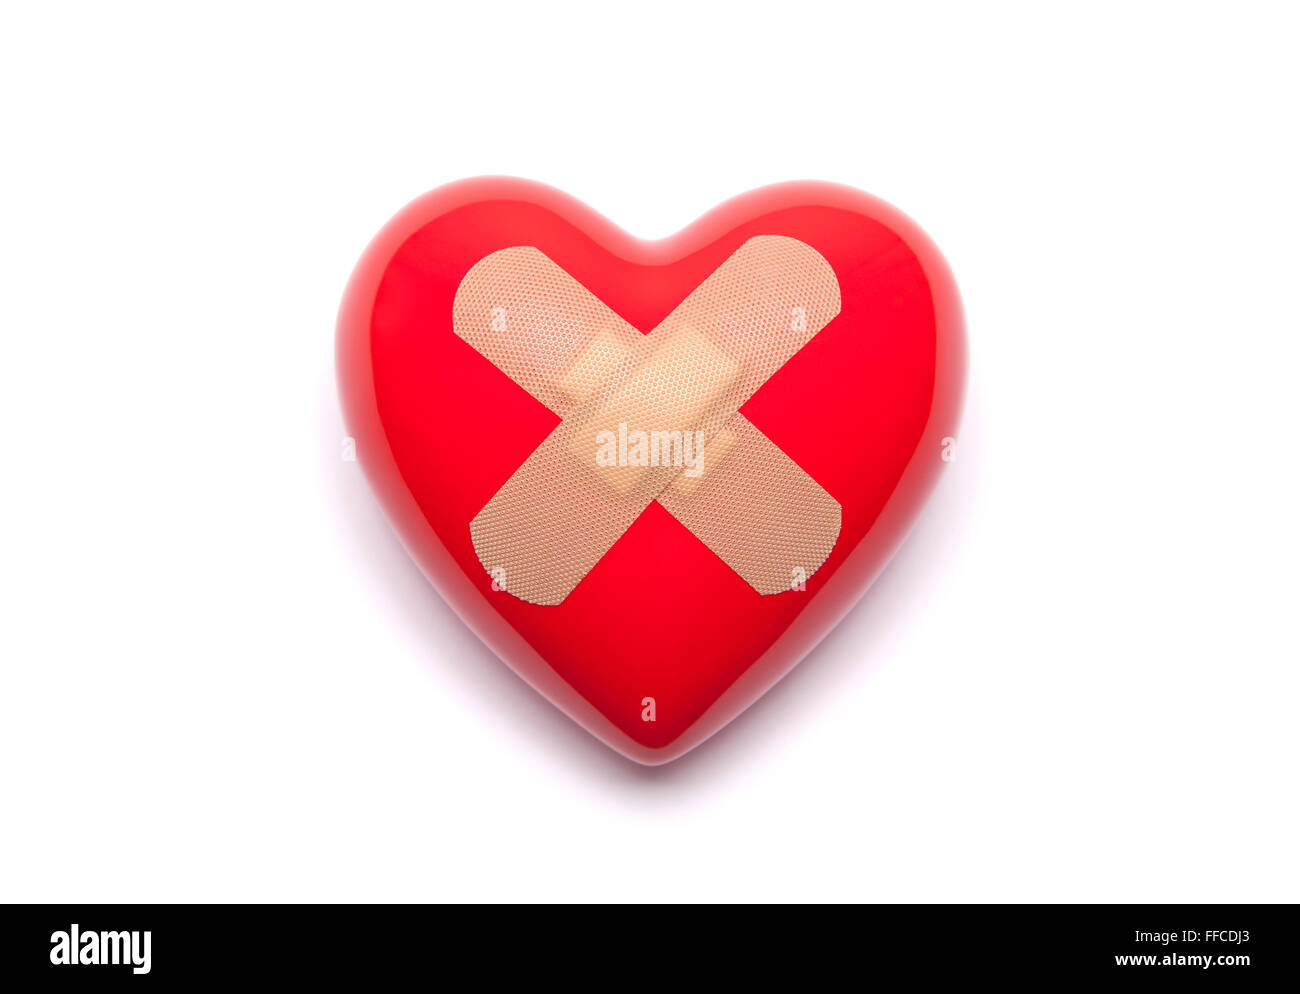 Red heart with adhesive plaster on white background Stock Photo